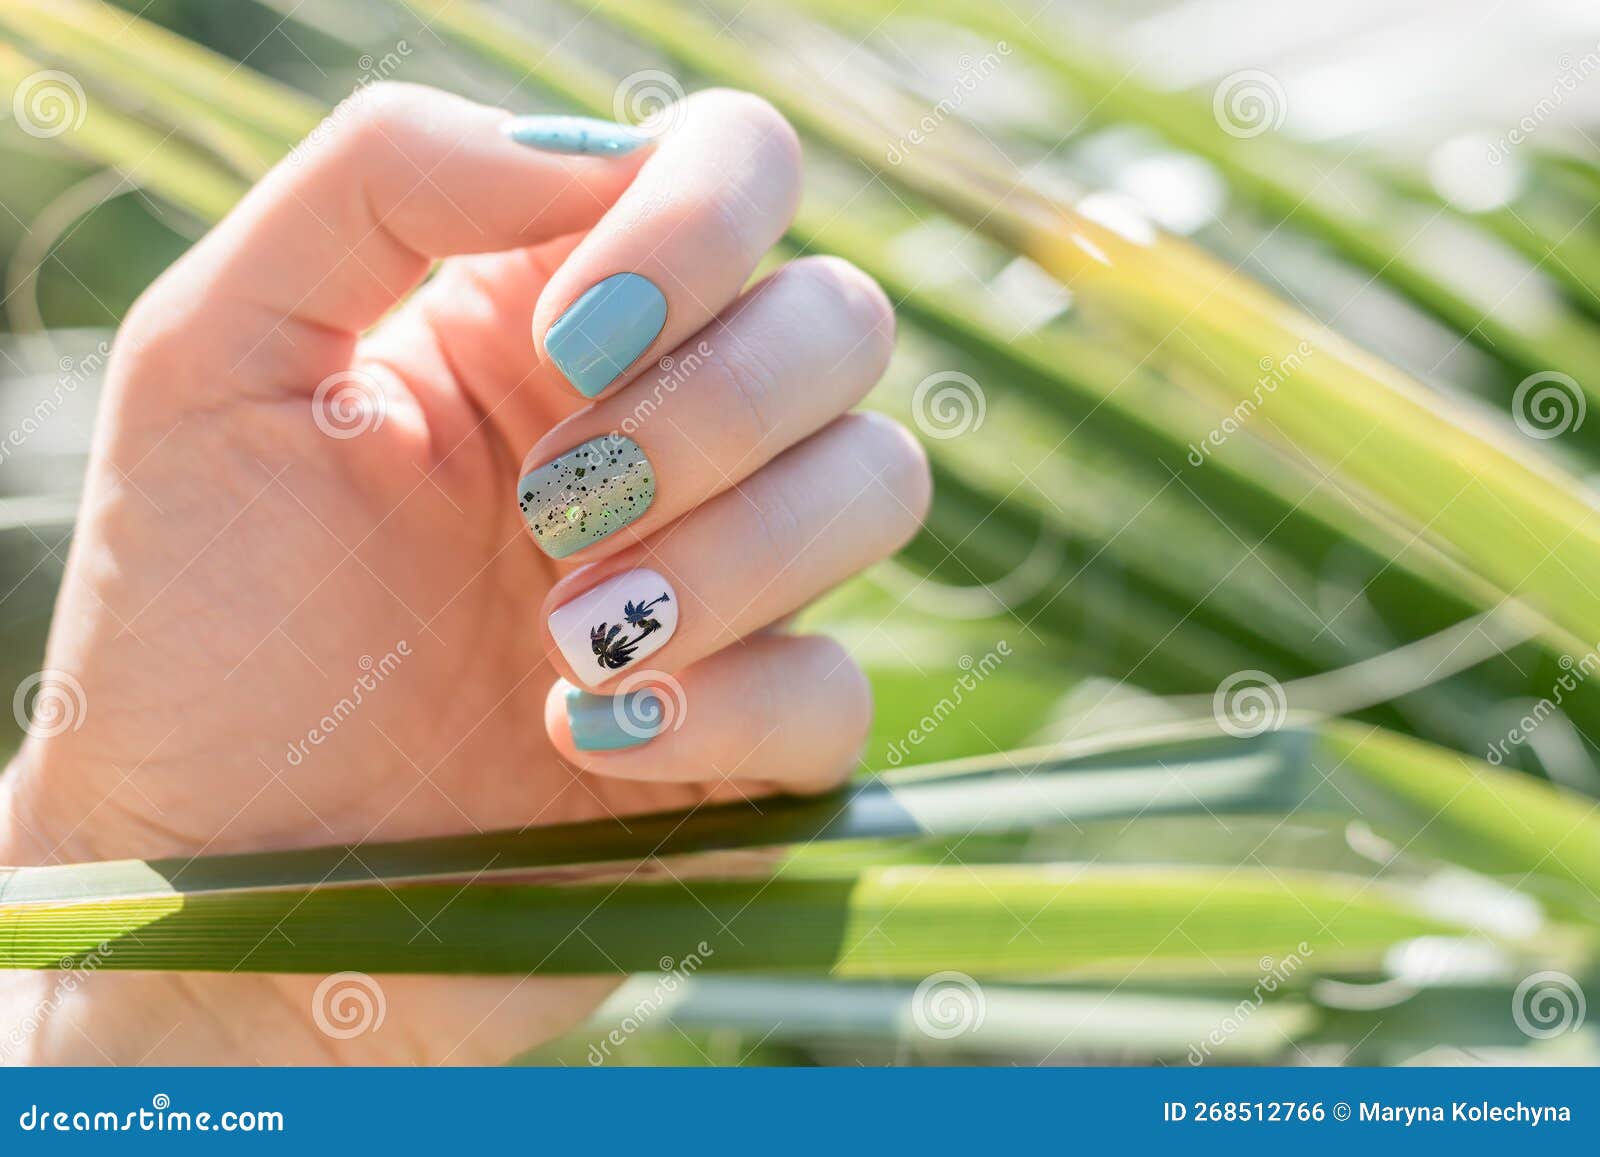 6. Blue and White Striped Cruise Nail Art - wide 8